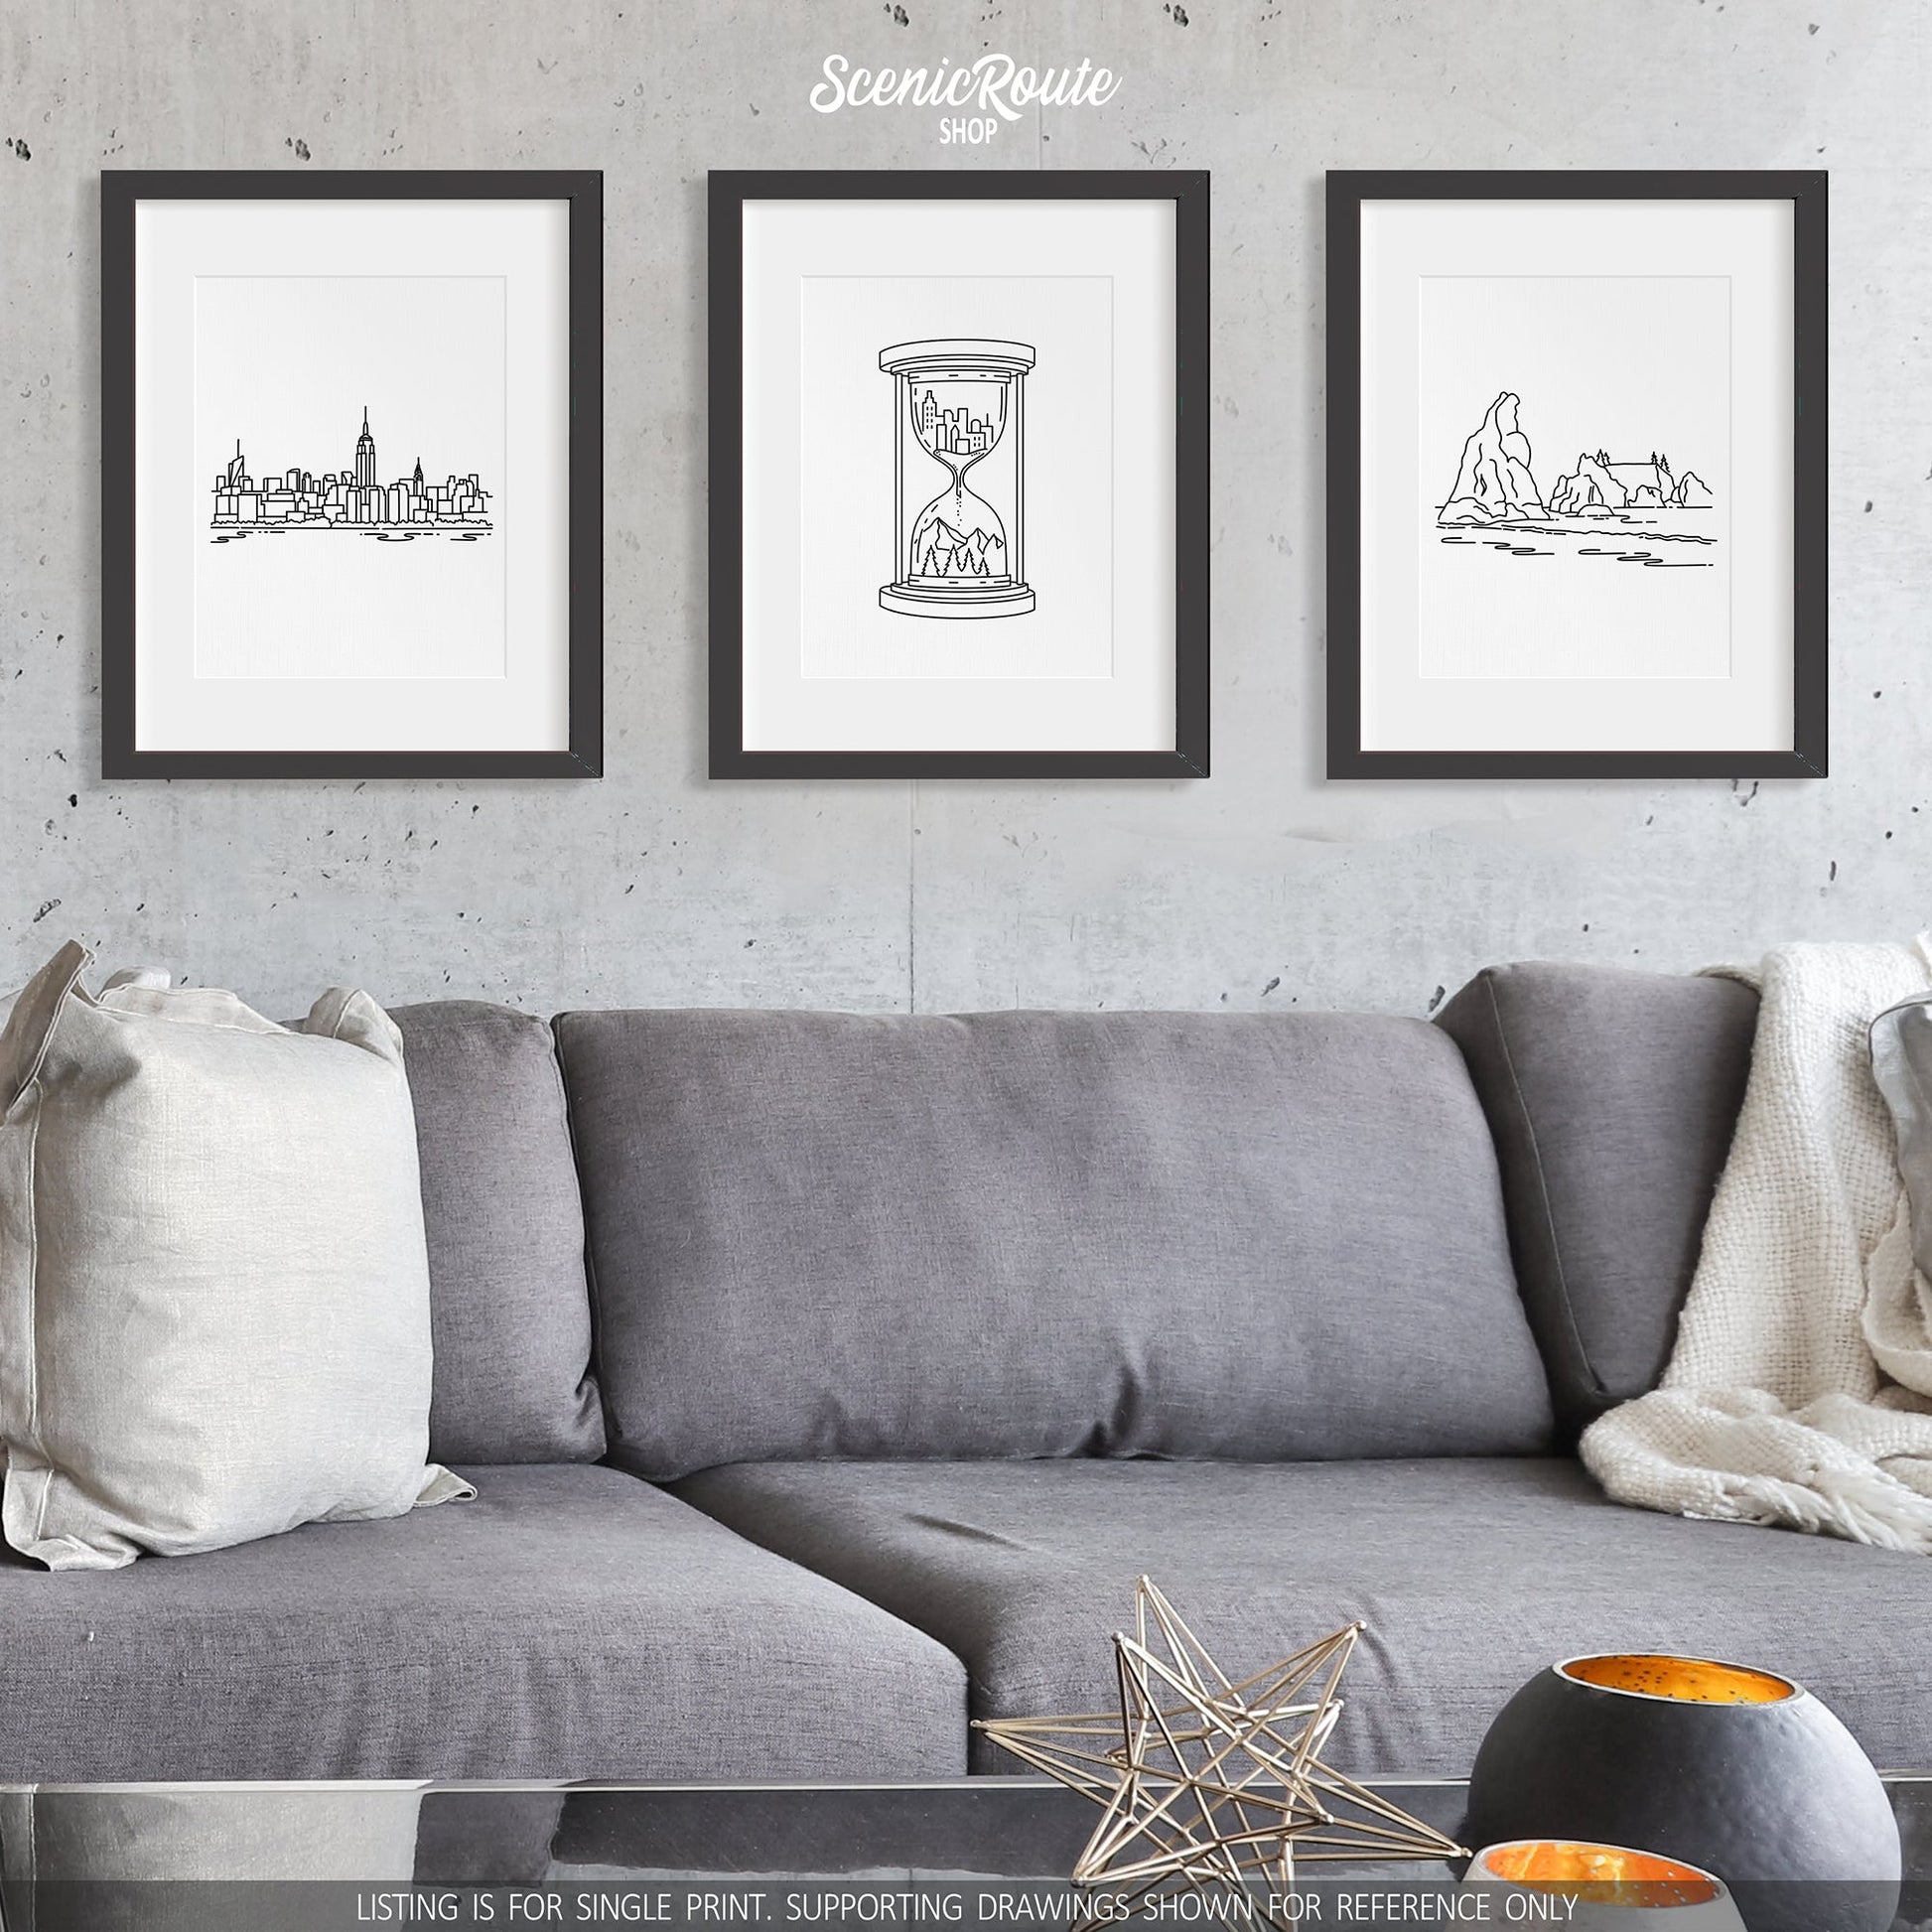 A group of three framed drawings on a wall above a couch. The line art drawings include the New York City Skyline, the Adventure Hourglass Drawing, and Haystack Rock